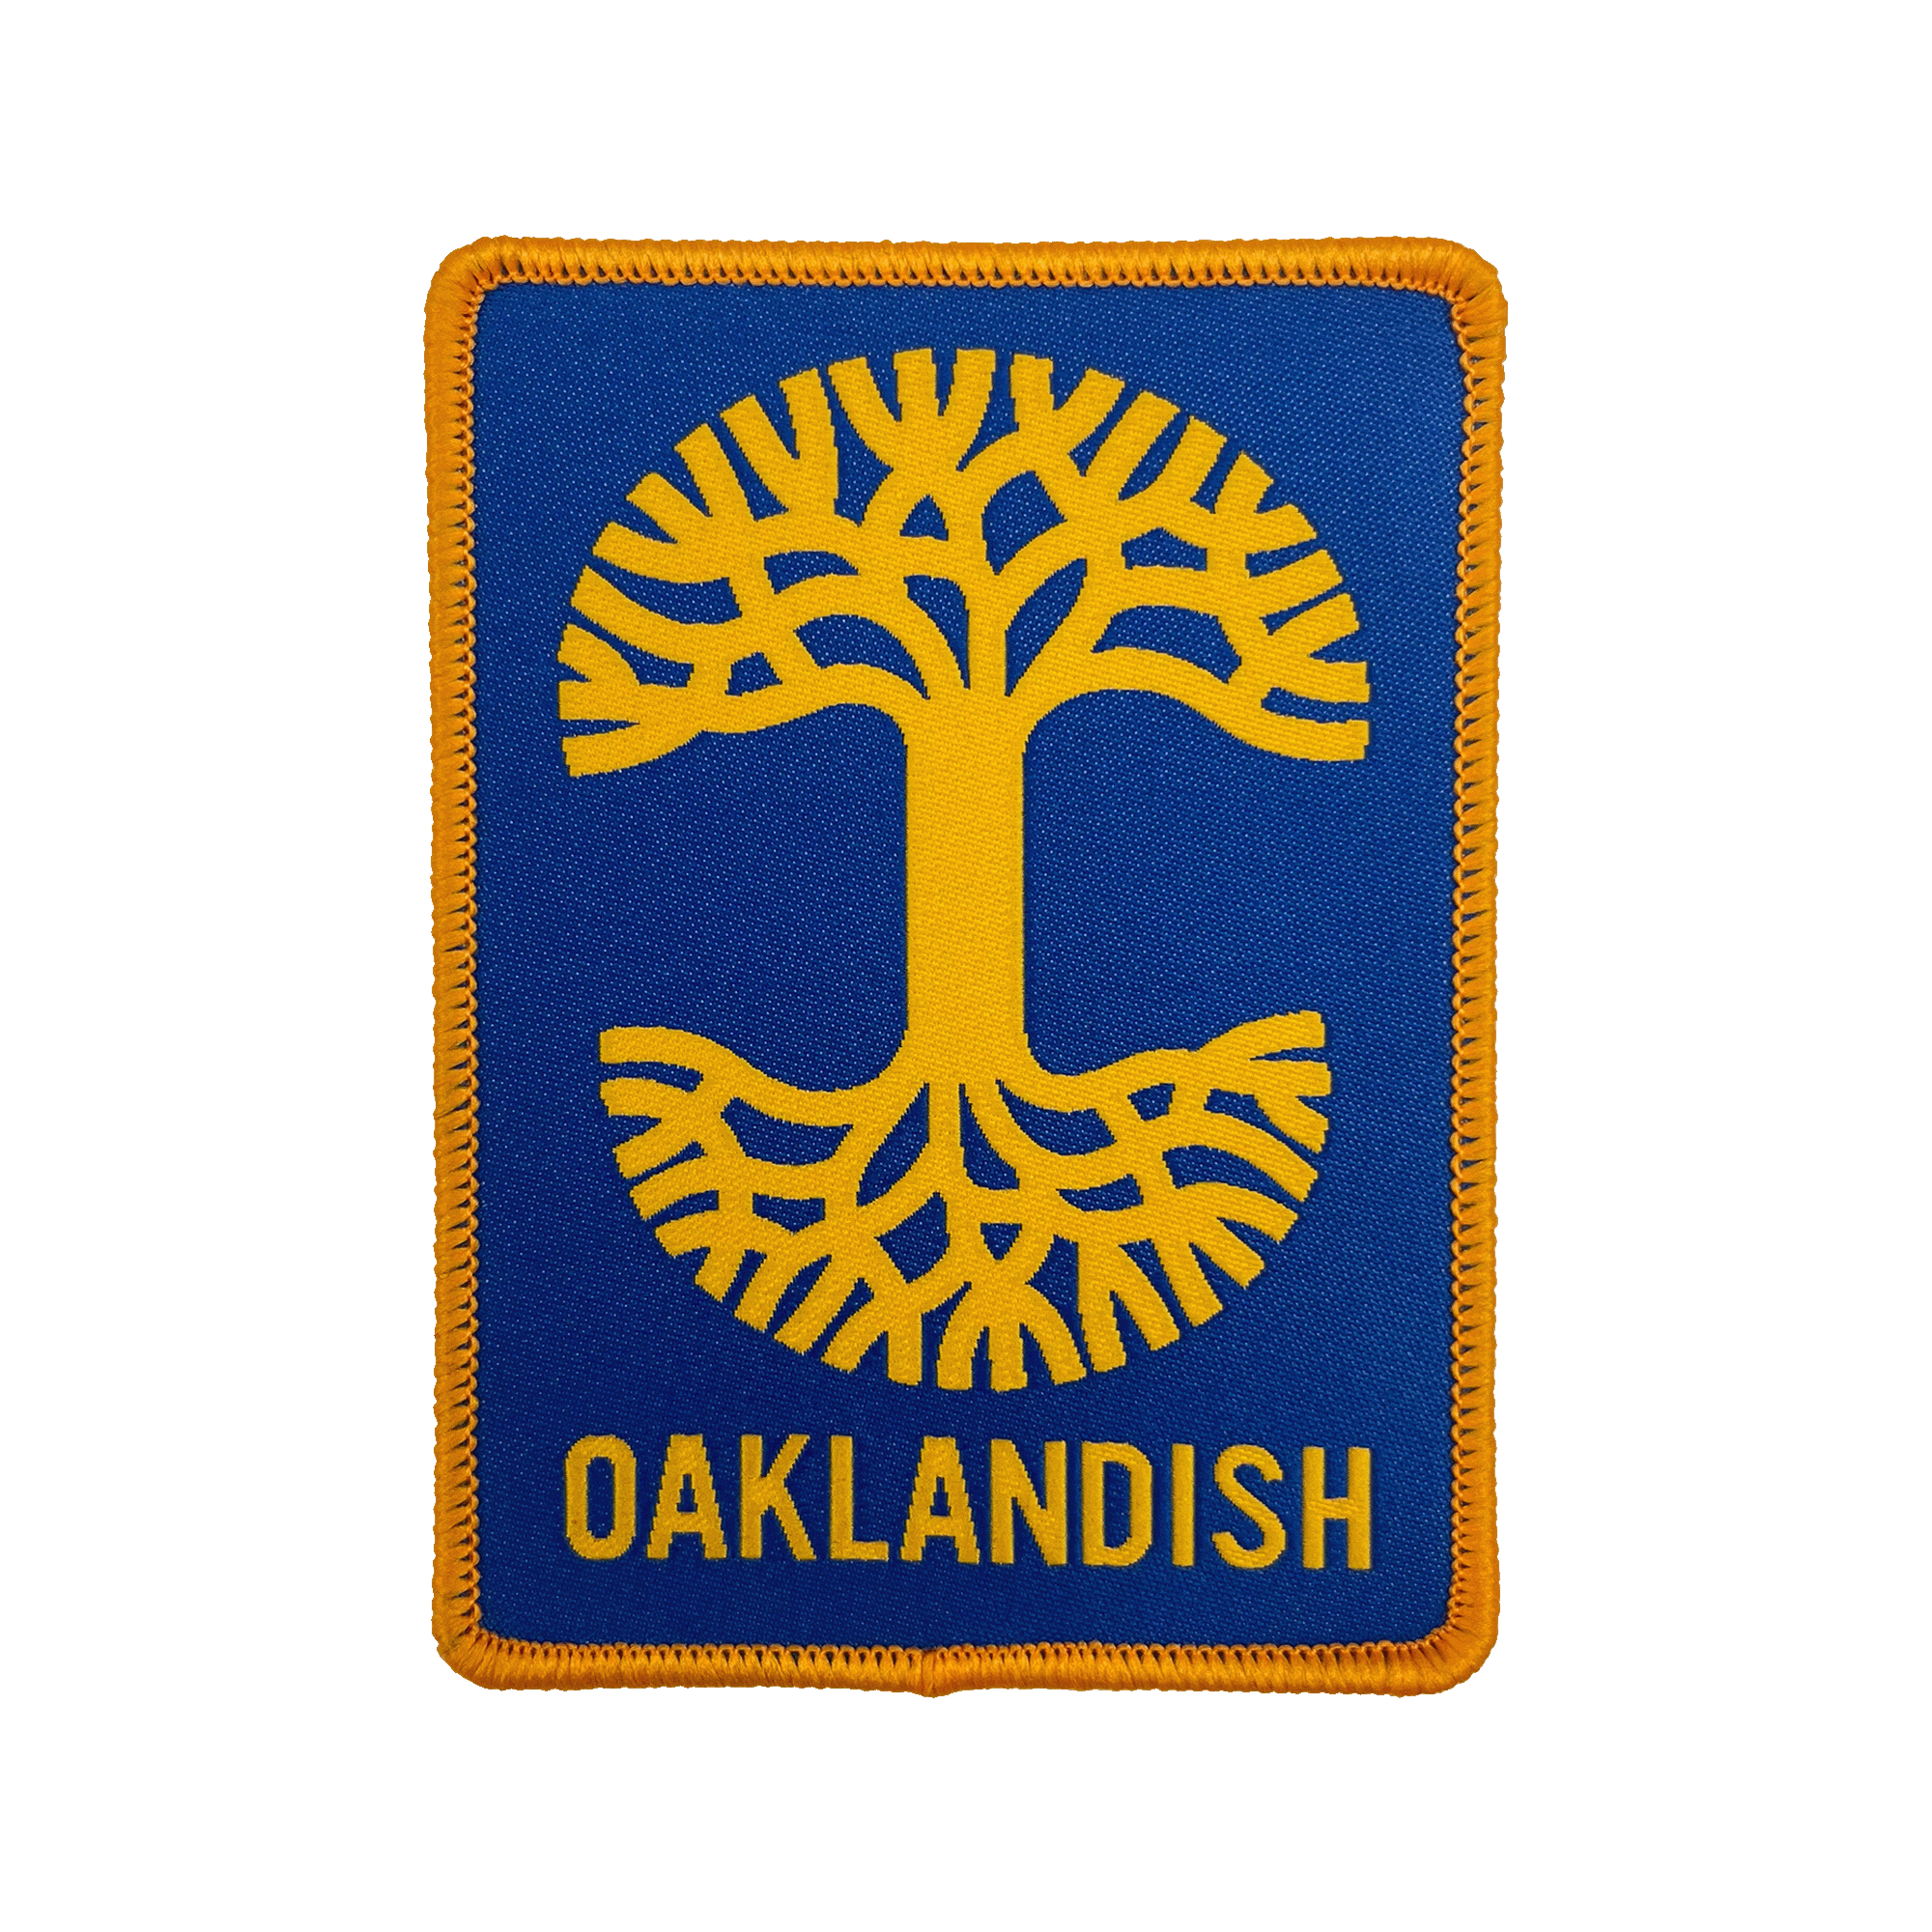 Royal blue woven iron-on patch with gold Oaklandish tree logo and wordmark.